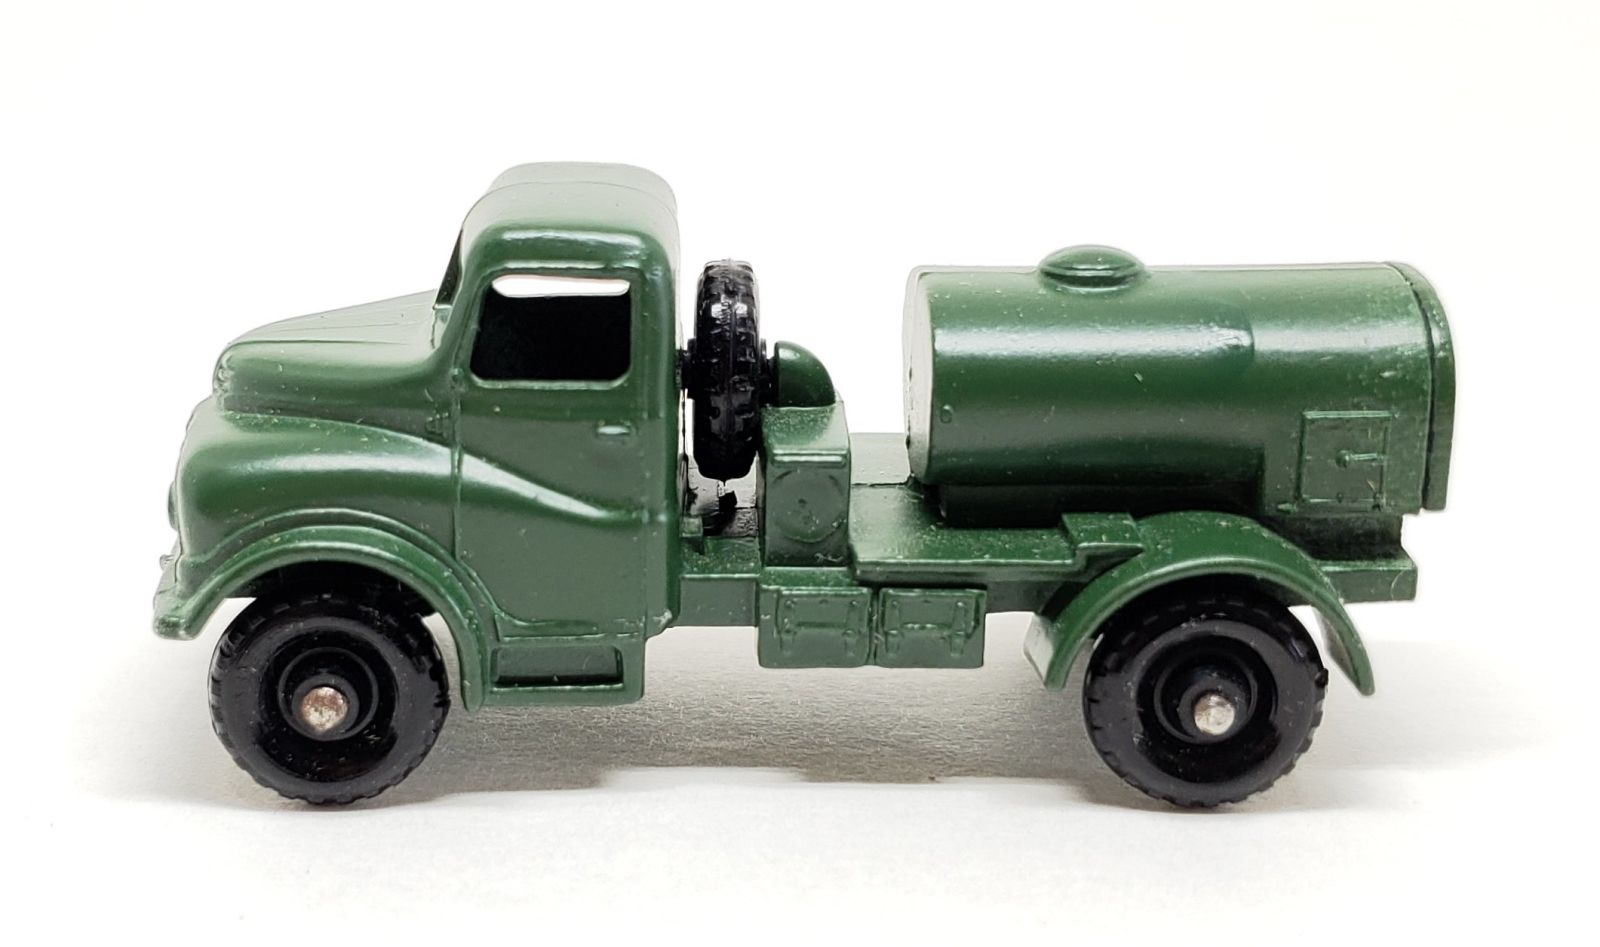 Illustration for article titled [REVIEW] Lesney Matchbox Austin 200 Gallon Water Truck